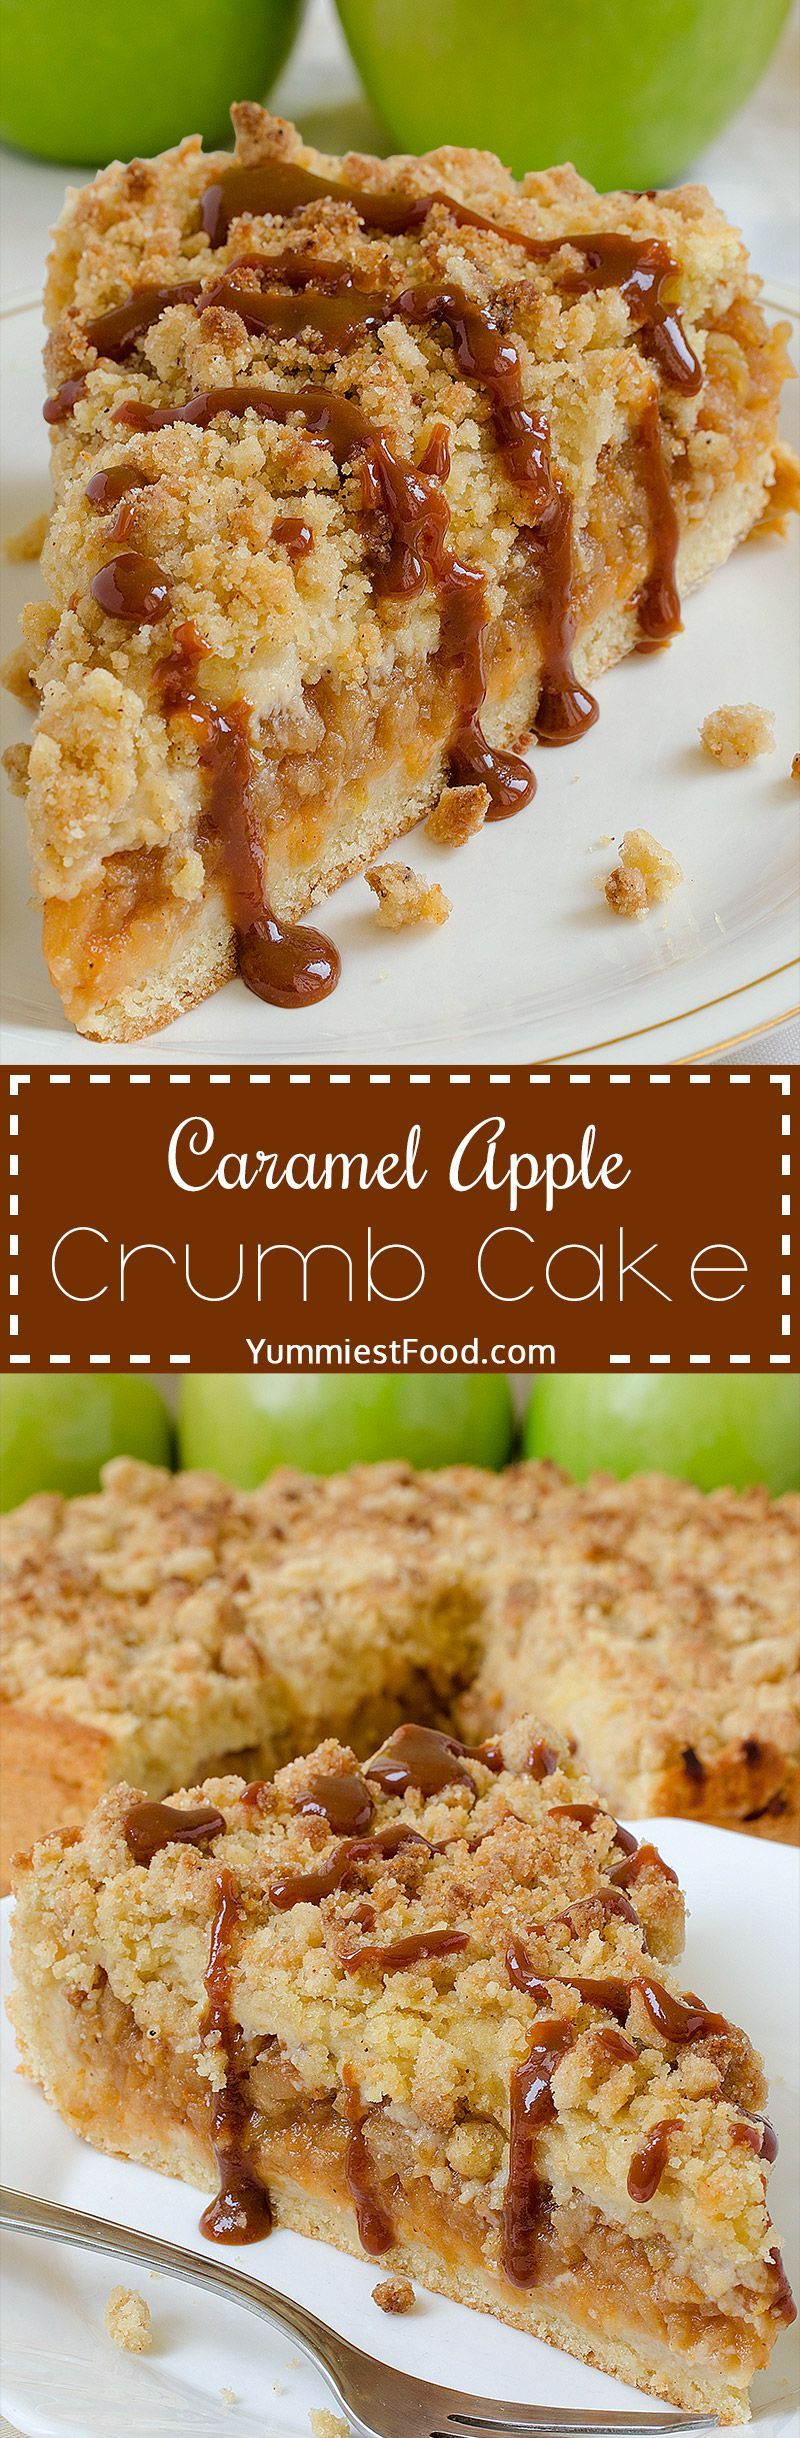 Caramel Apple Crumb Cake – This recipe is perfectly delicious! This Apple Cake with crumb mixture over the